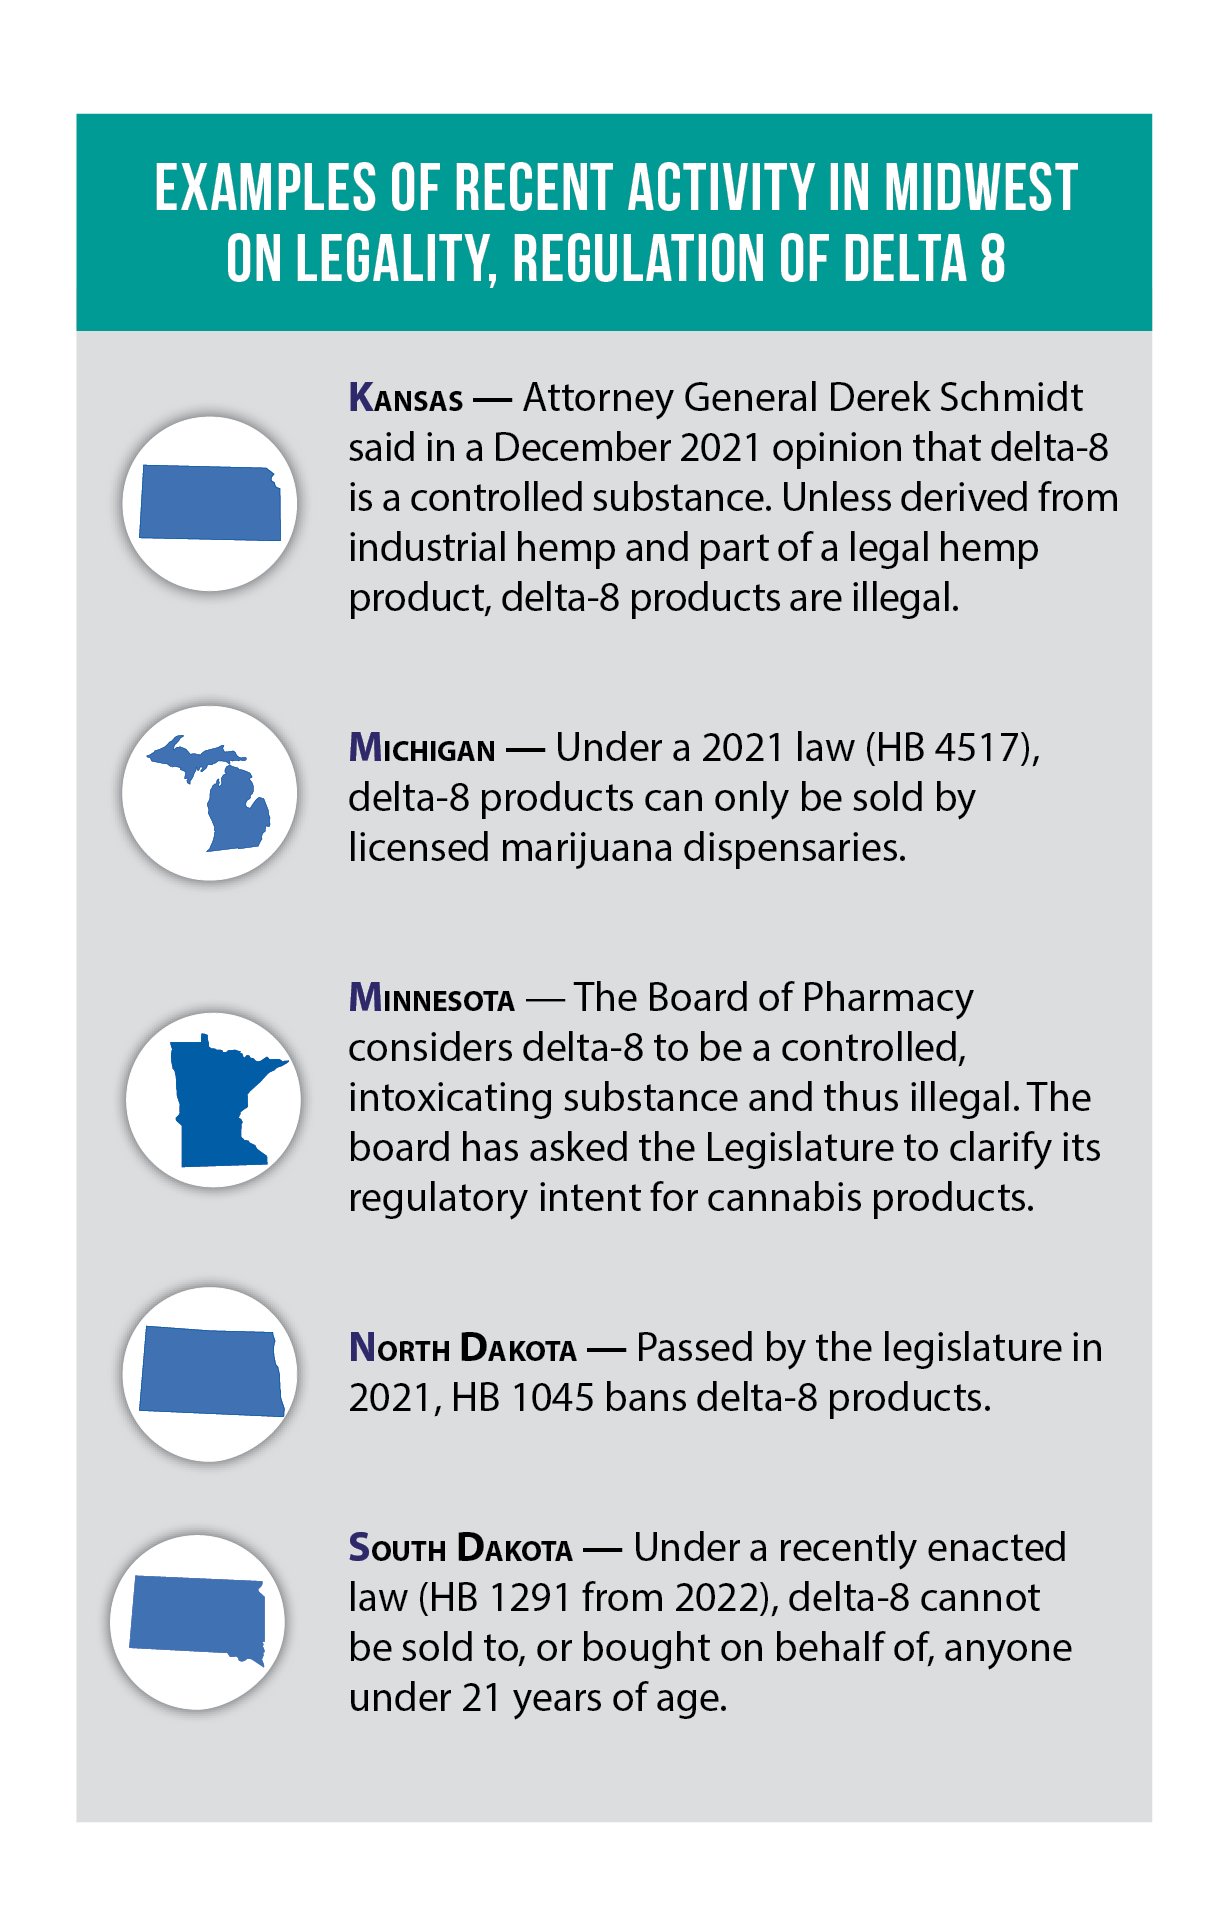 List of select Midwestern states' regulation policies on Delta-8